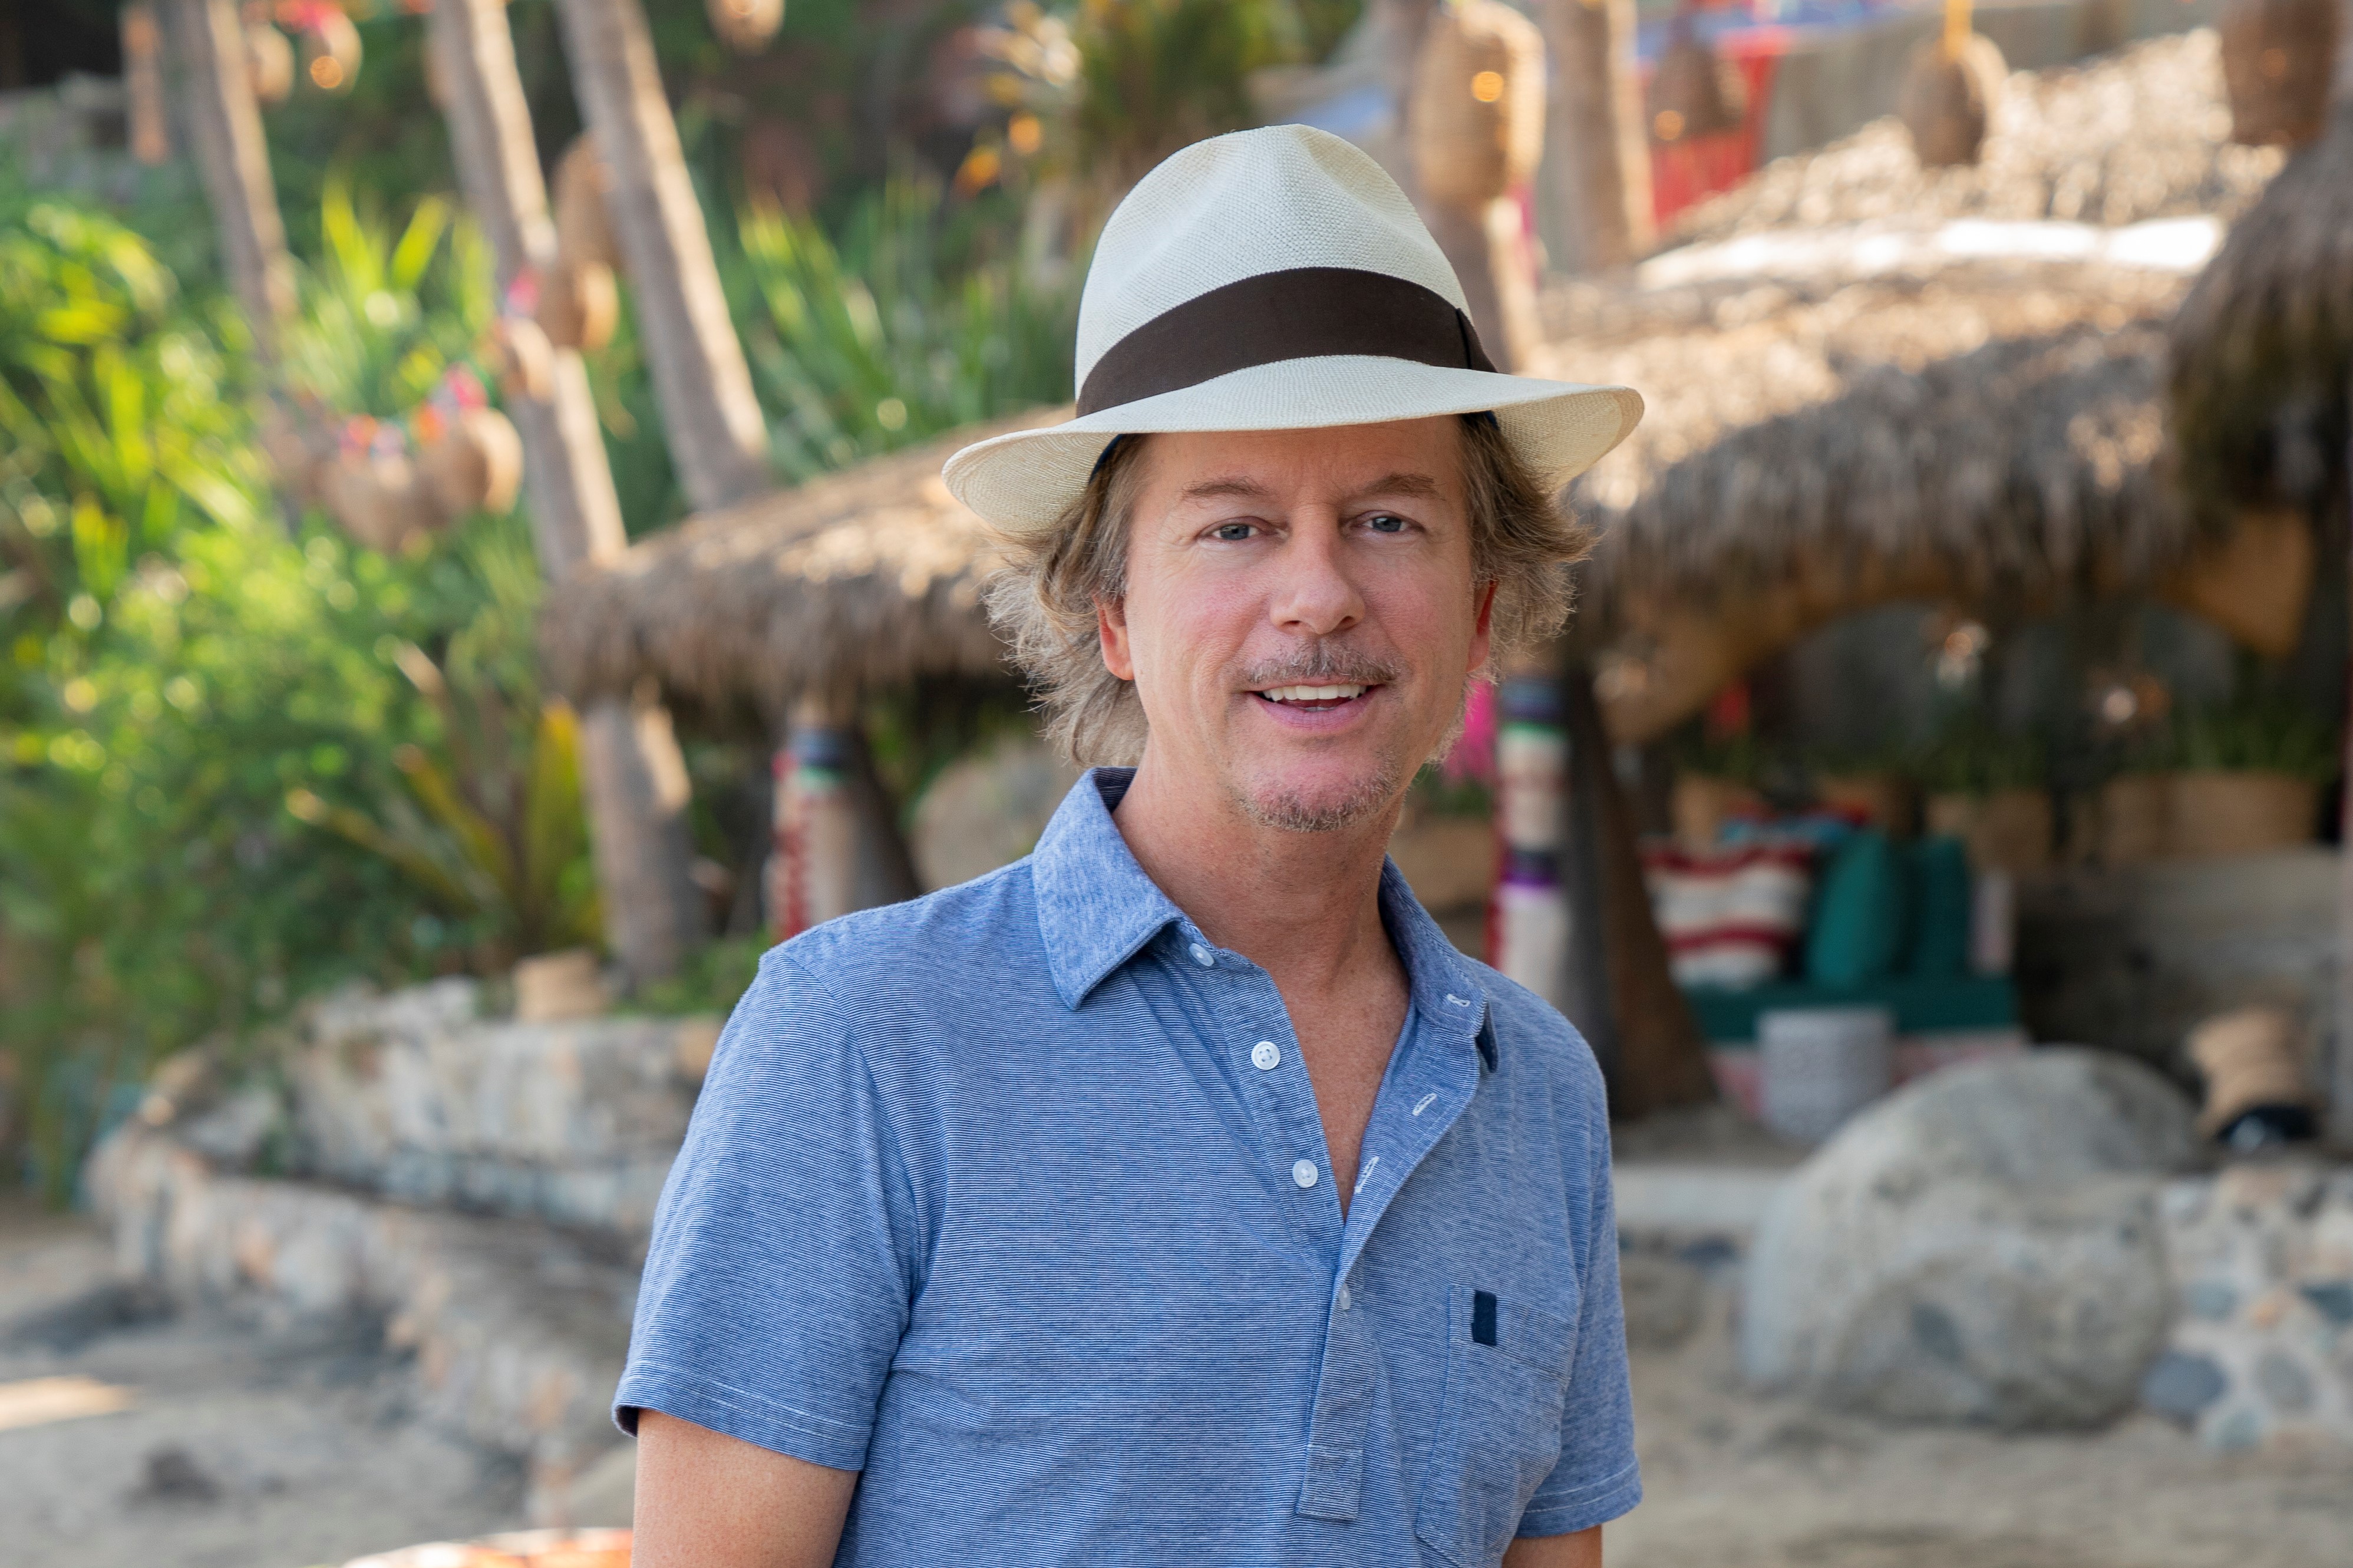 David Spade in a white hat on 'Bachelor in Paradise.'